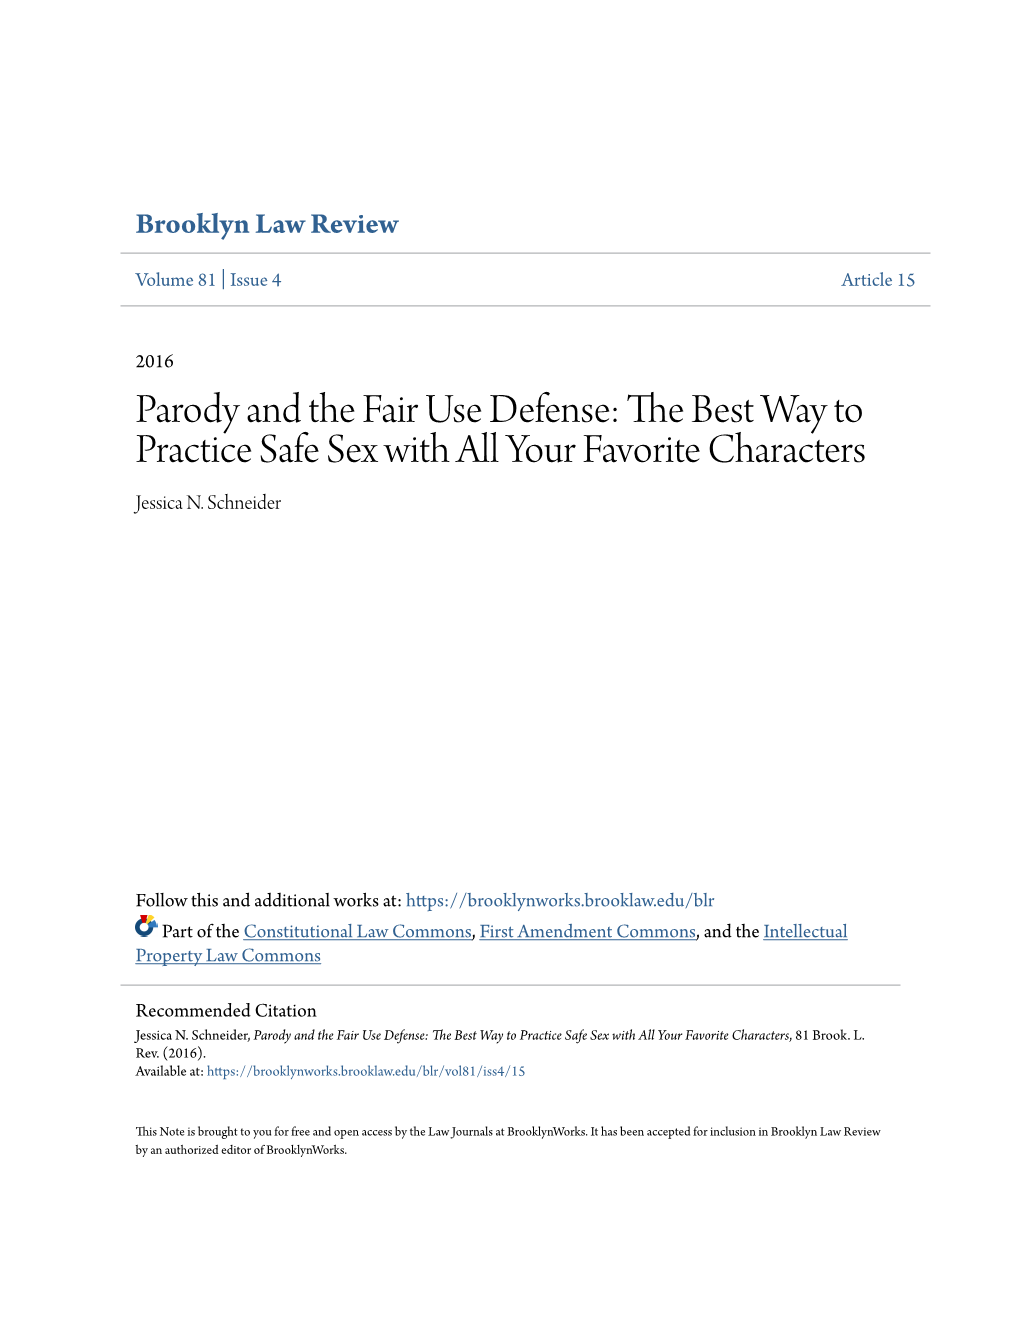 Parody and the Fair Use Defense: the Best Way to Practice Safe Sex with All Your Favorite Characters Jessica N